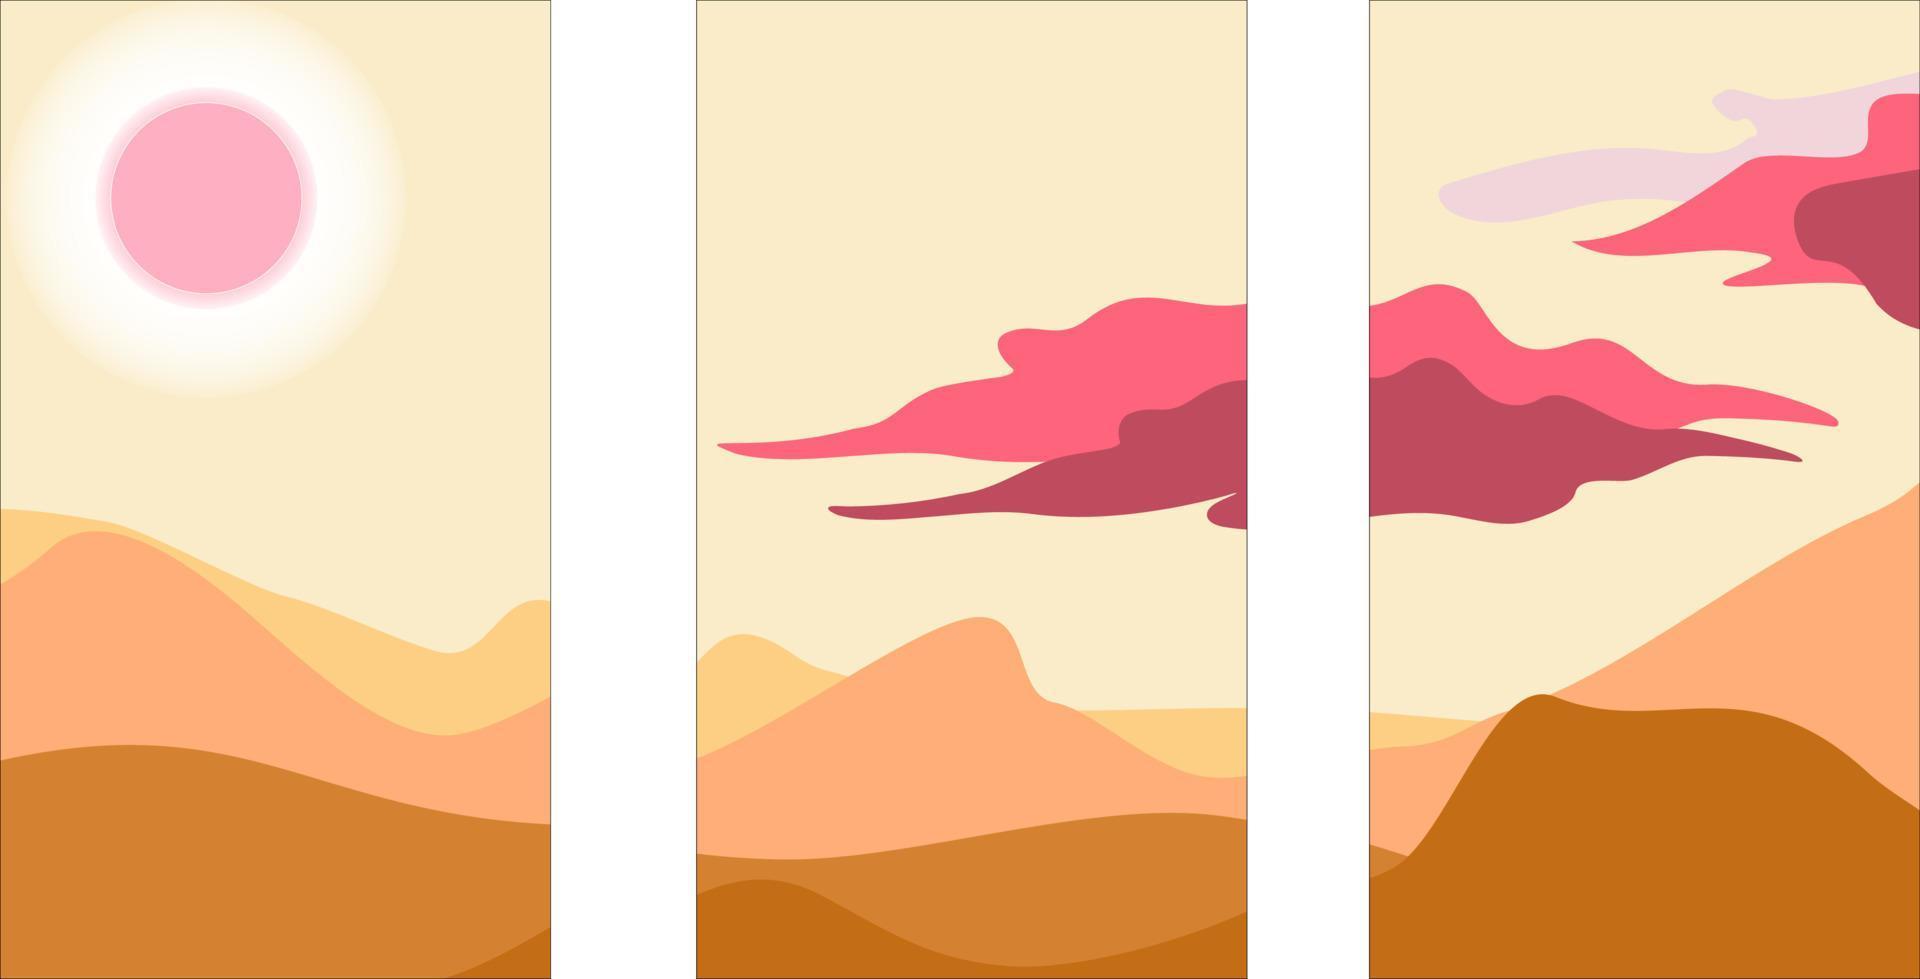 3 sets of minimal style illustrations. Vector of sunrise and cloud with beautiful mountains background. Design illustration for canvas print, poster, home decor, book cover, wallpaper.